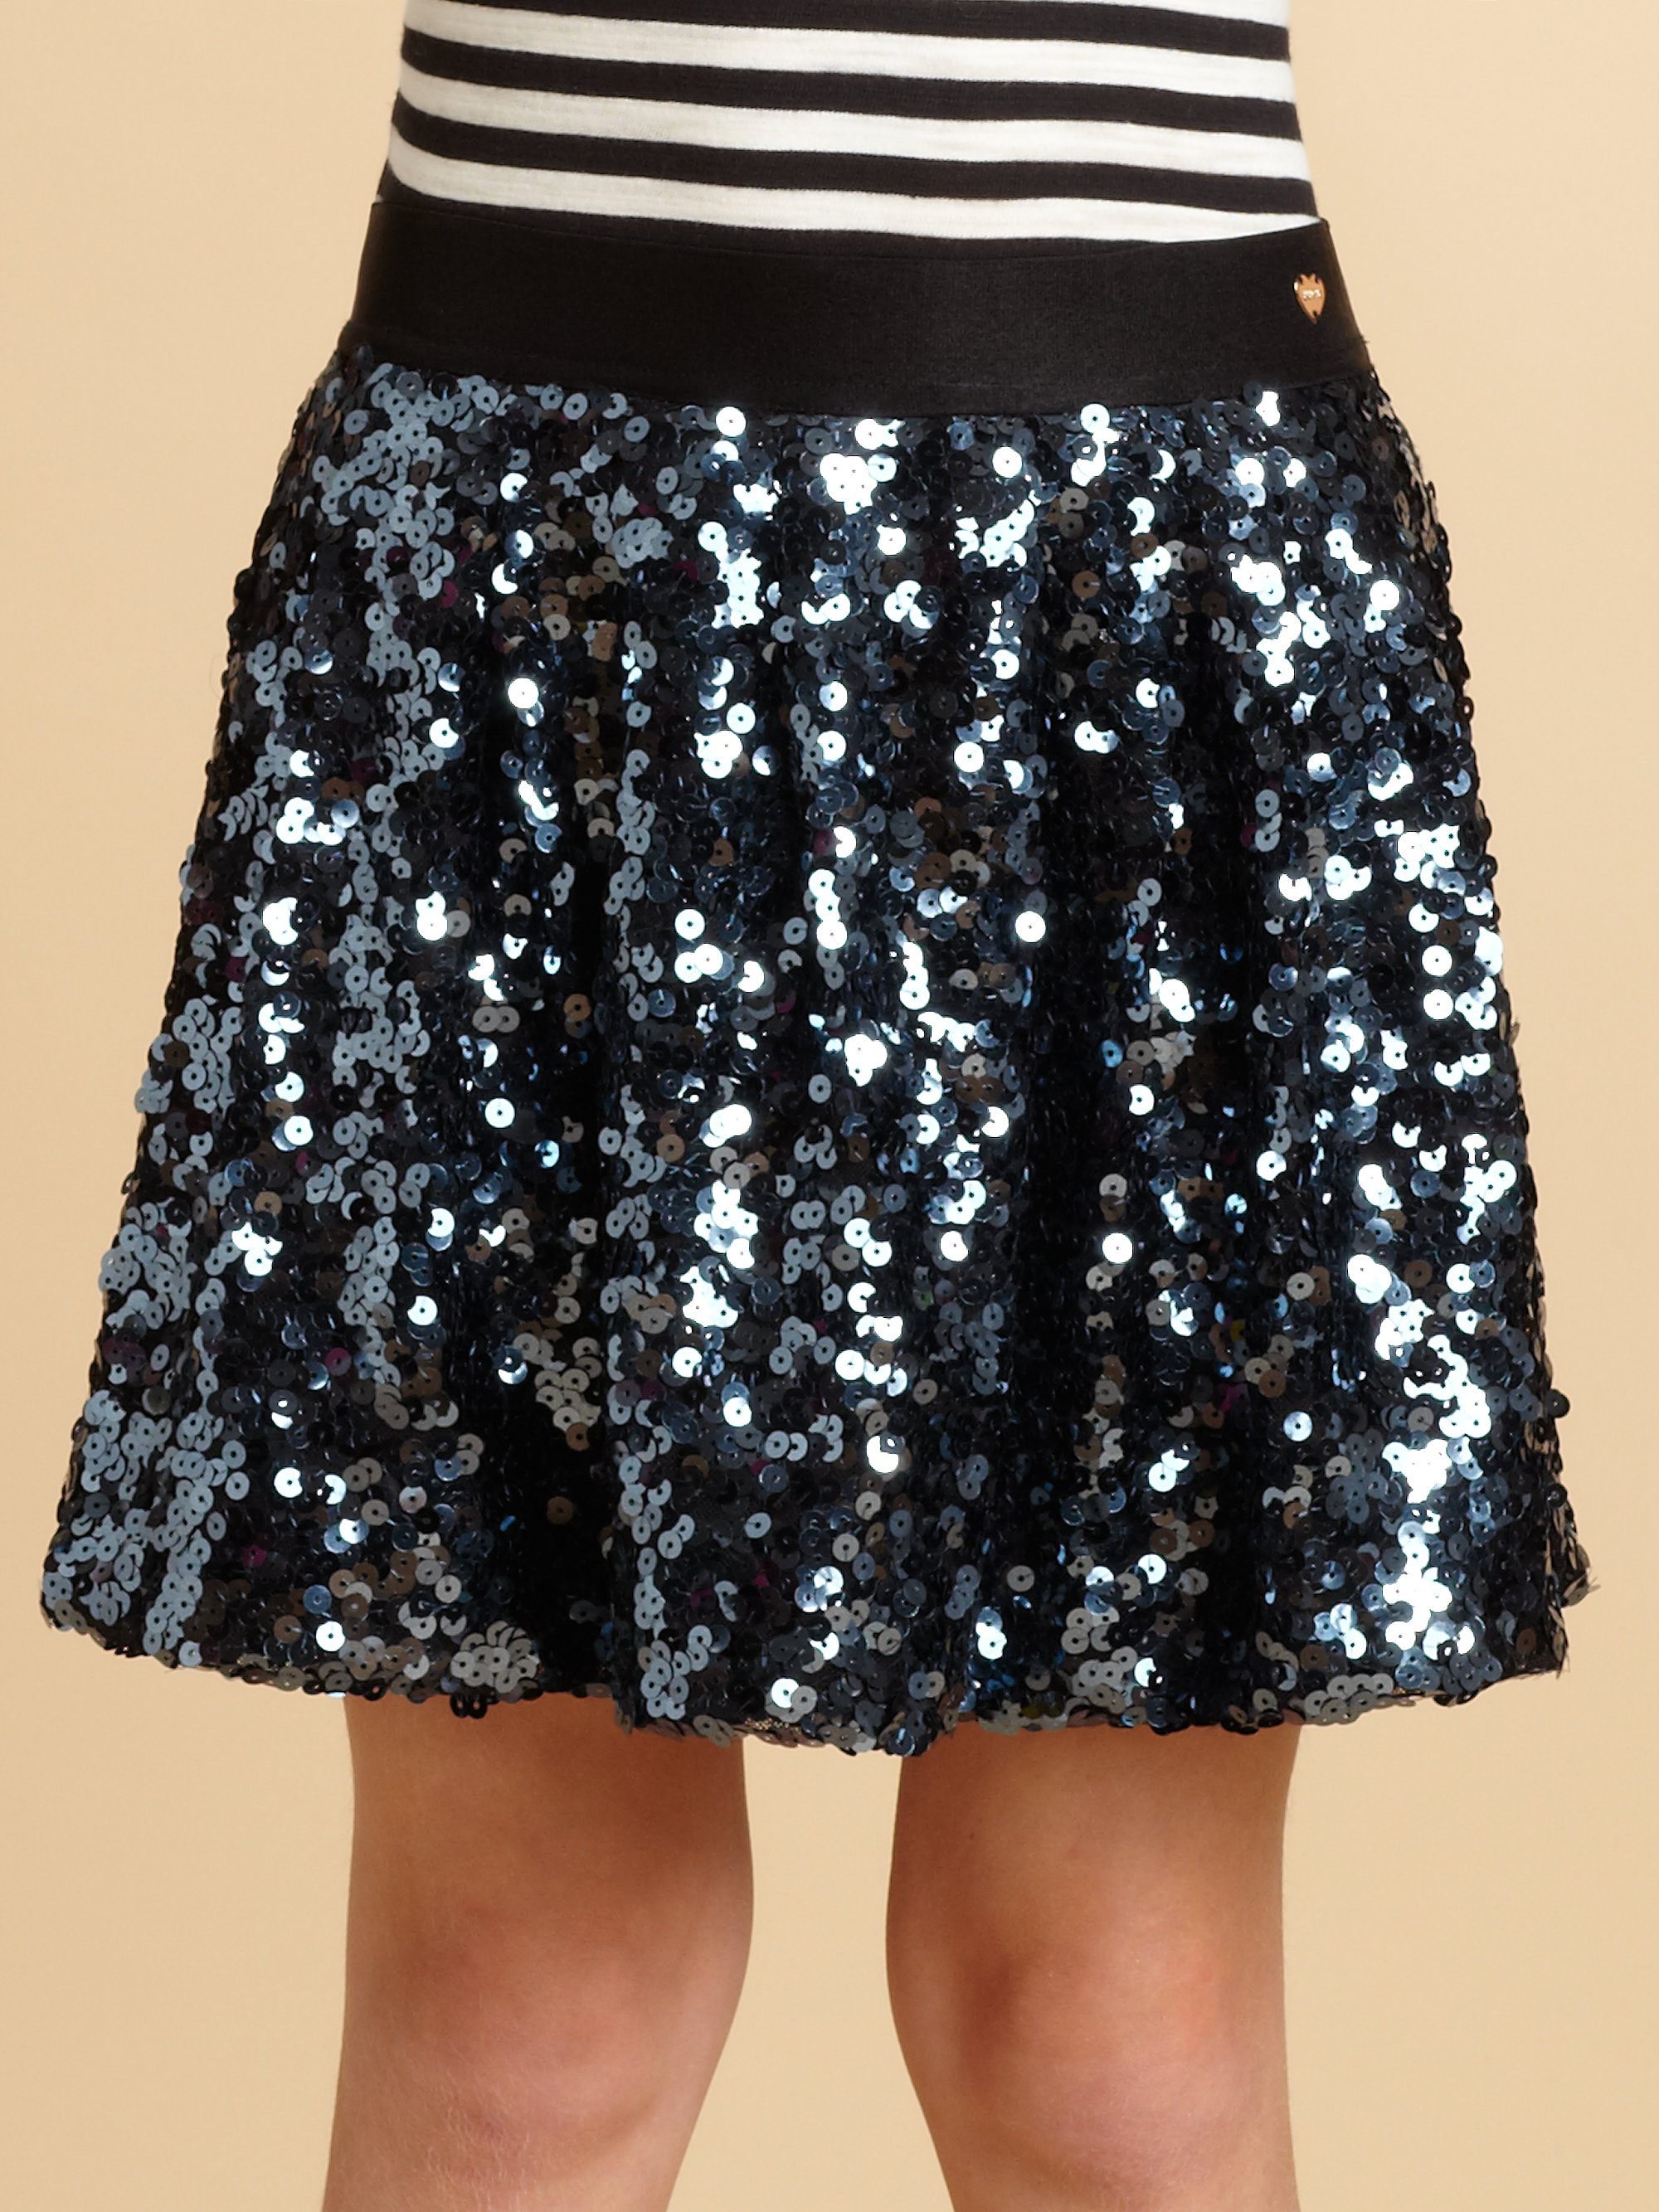 Juicy couture Girls Sequined Skirt in Black | Lyst